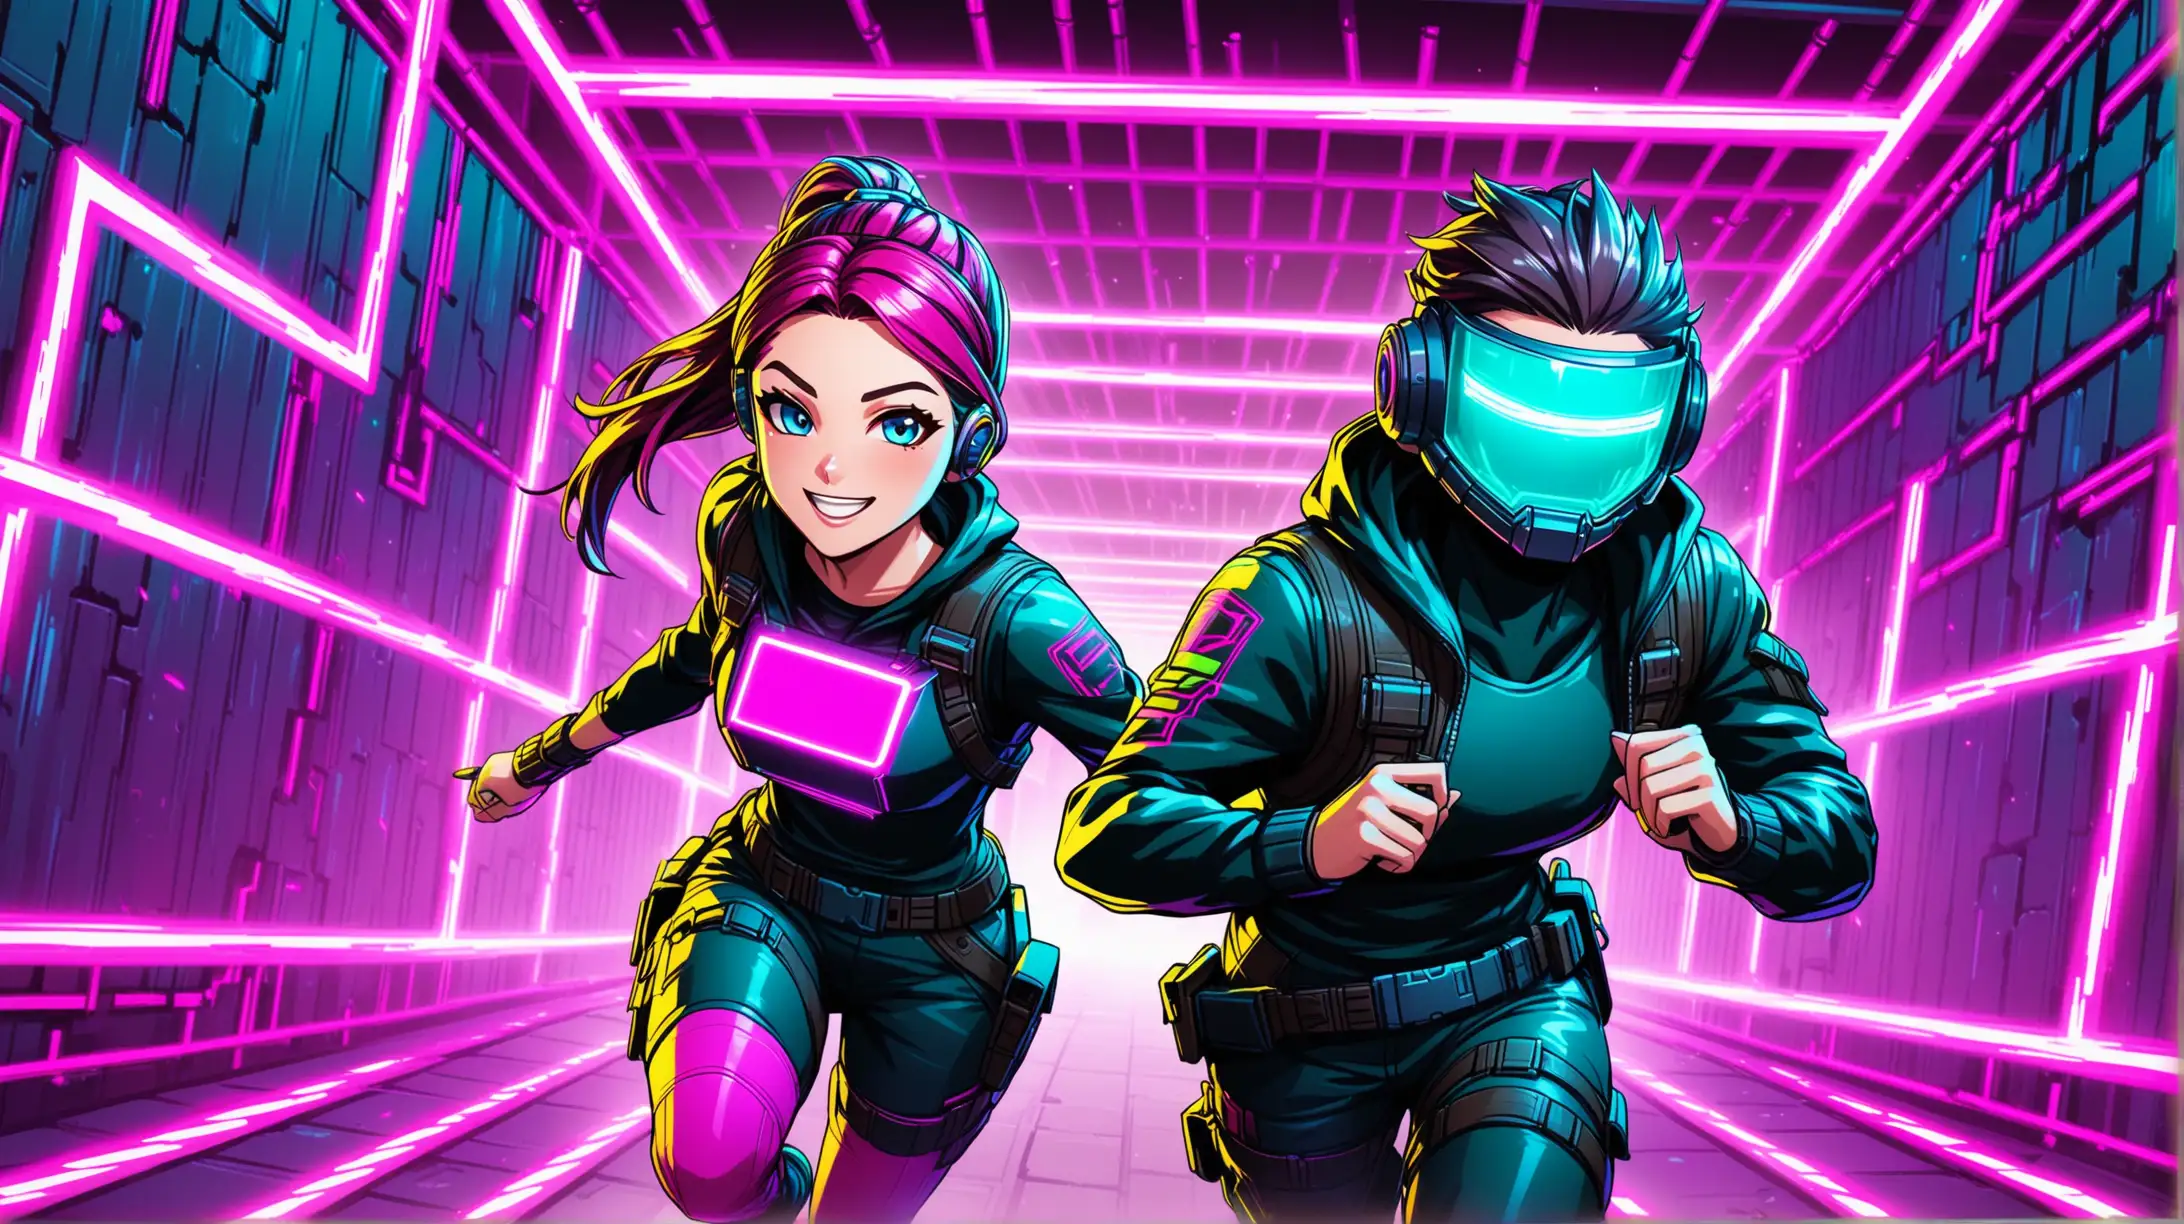 two colorful Fortnite characters named Rick and Anna and they are smiling and are running an obstacle course. the theme is cyberpunk with neon and metal walls. close-up